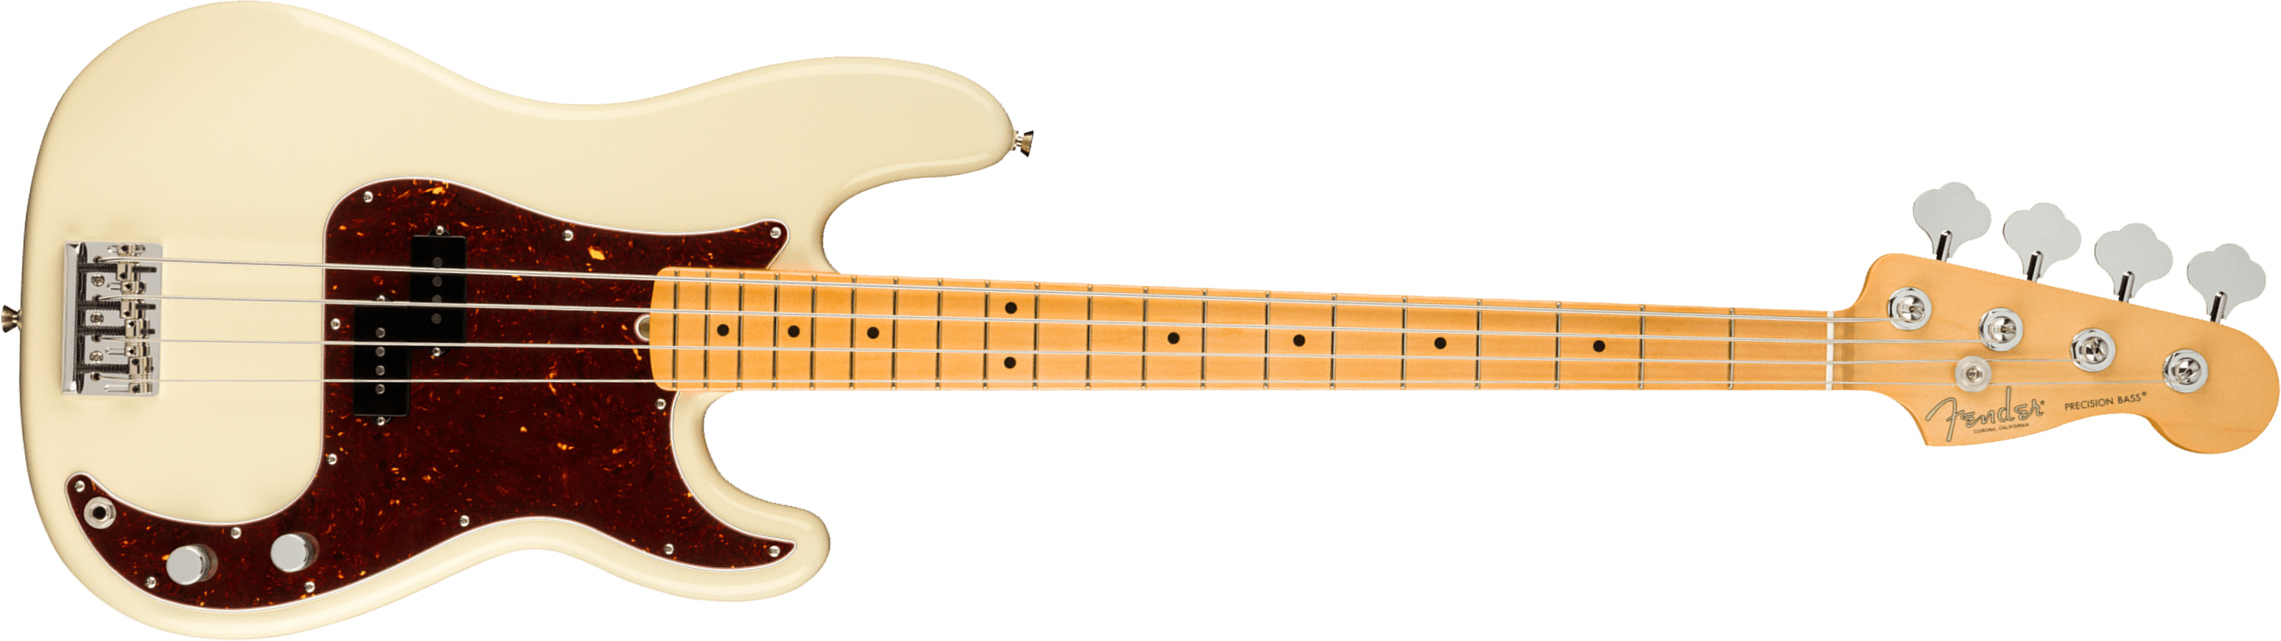 Fender Precision Bass American Professional Ii Usa Mn - Olympic White - Solidbody E-bass - Main picture